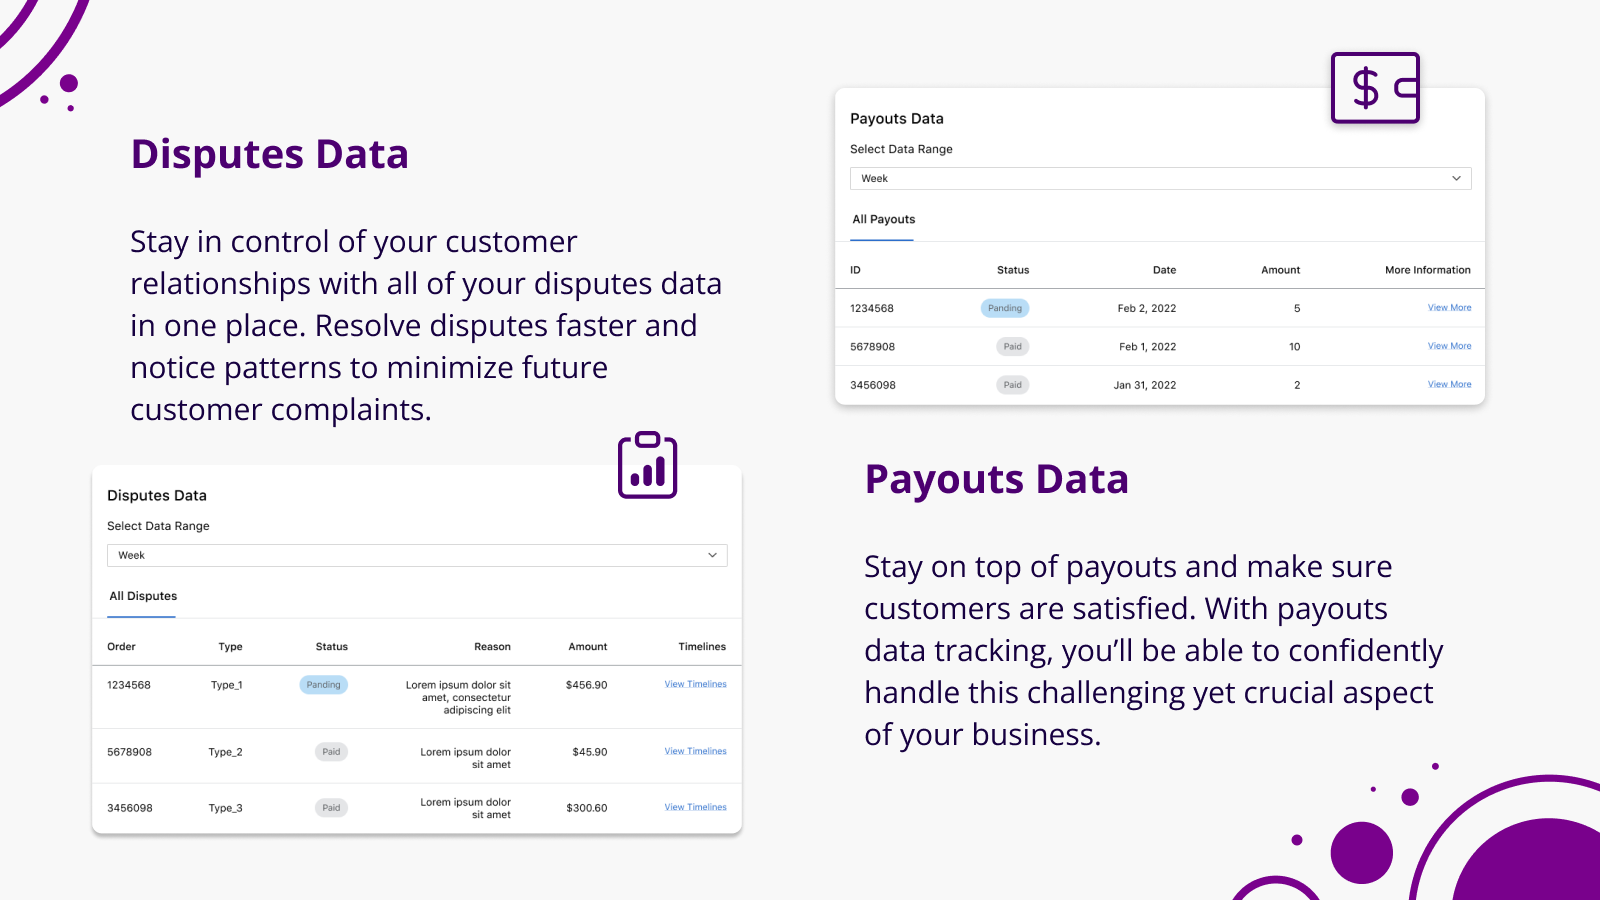 Easily Track Disputes and Payouts Data